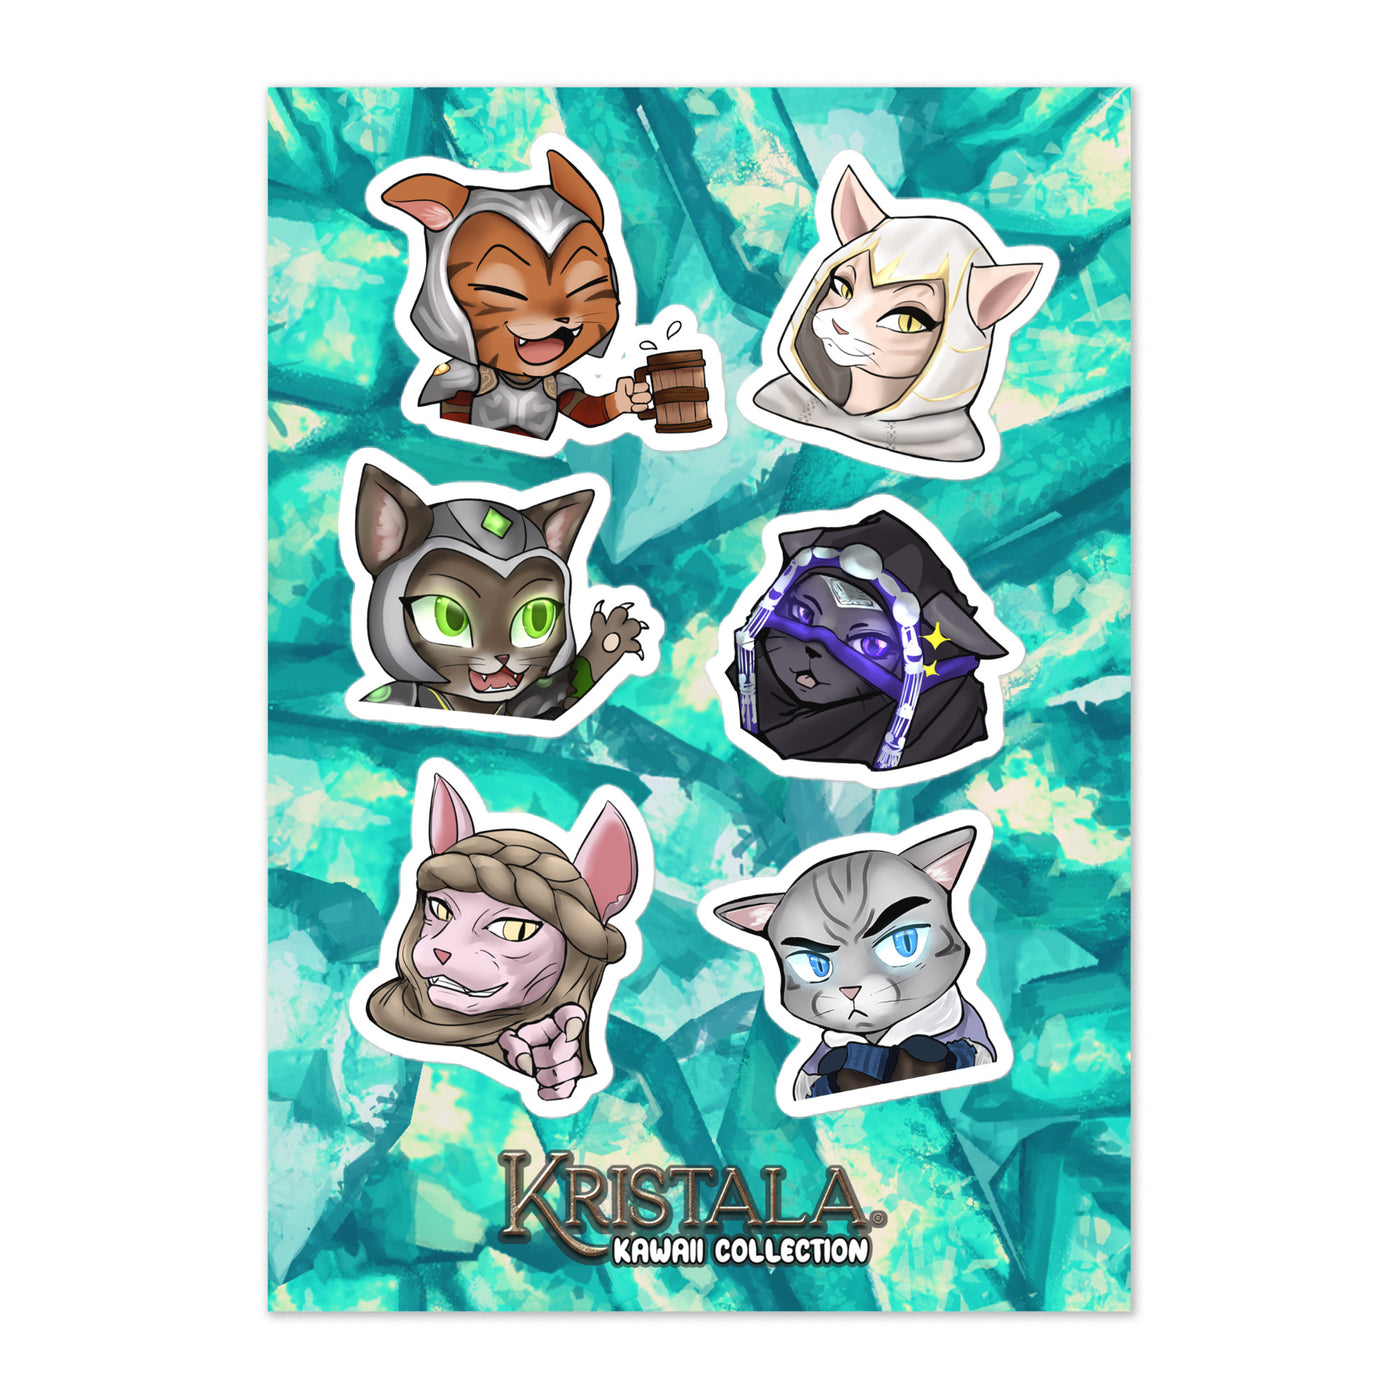 head-on front view of sticker sheet printed with all six kristala kawaii character sticker designs atop a teal crystal patterned backing sheet printed with the kristala kawaii collection logo at the bottom center white background